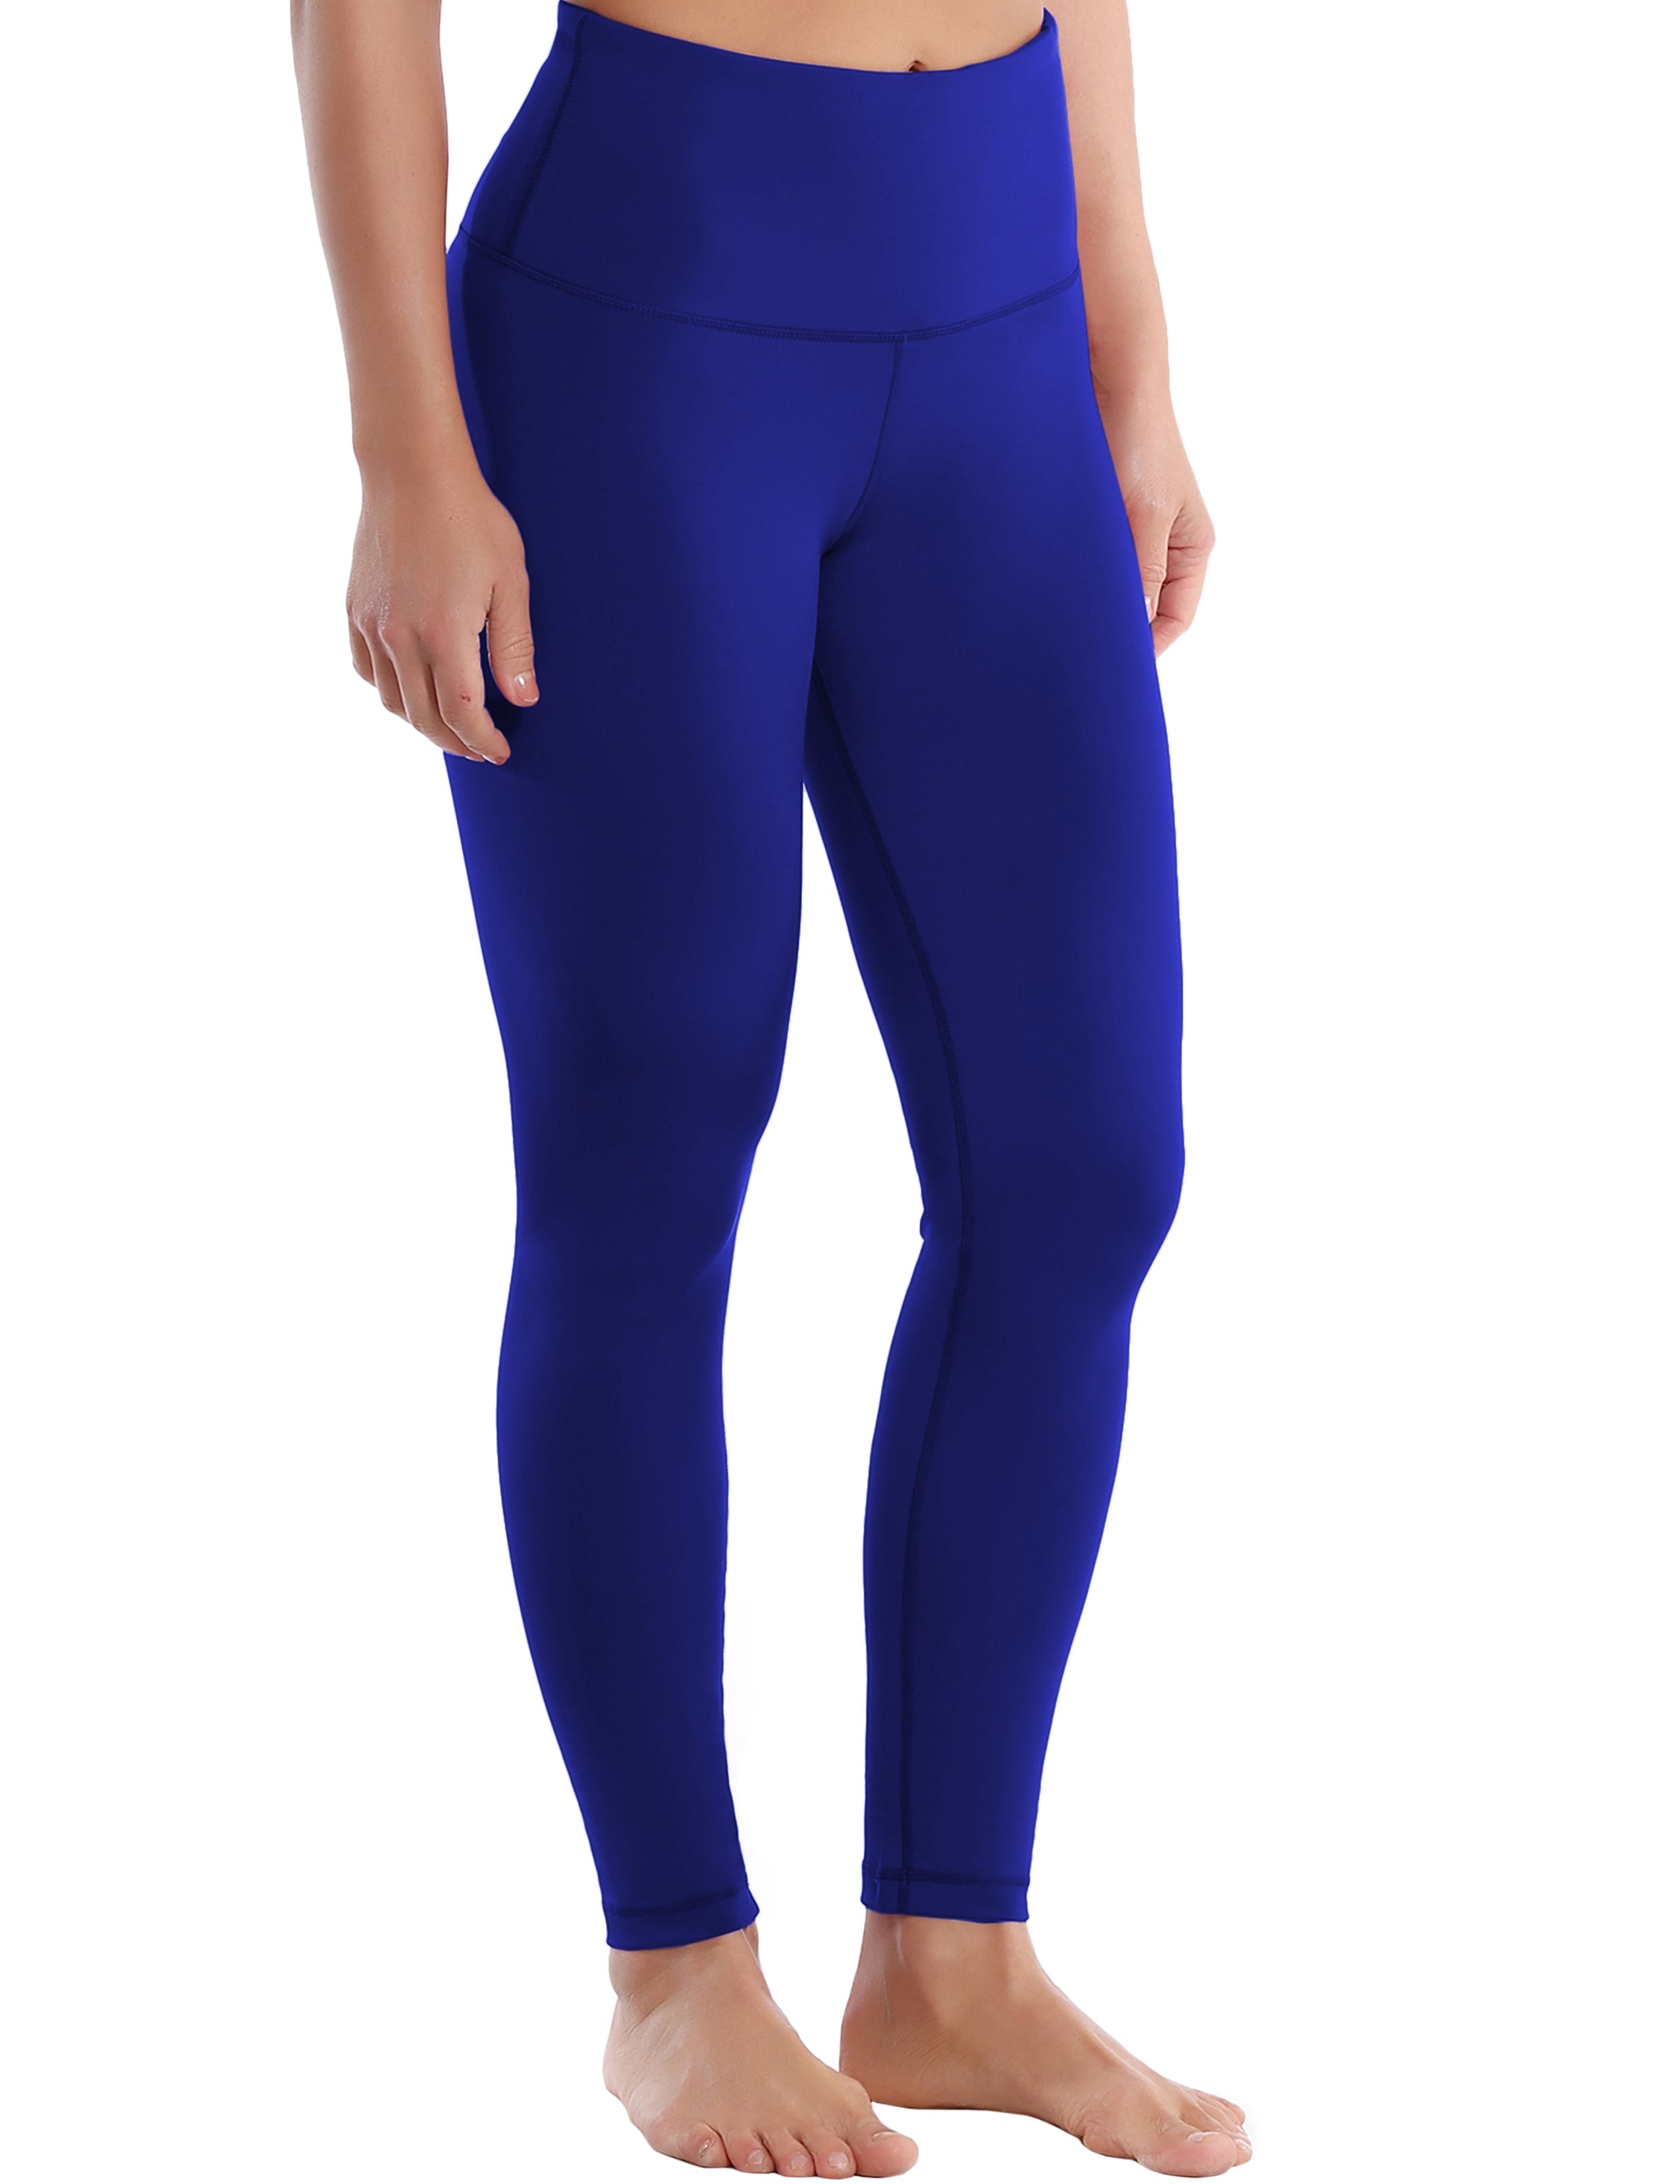 High Waist Jogging Pants navy 75%Nylon/25%Spandex Fabric doesn't attract lint easily 4-way stretch No see-through Moisture-wicking Tummy control Inner pocket Four lengths